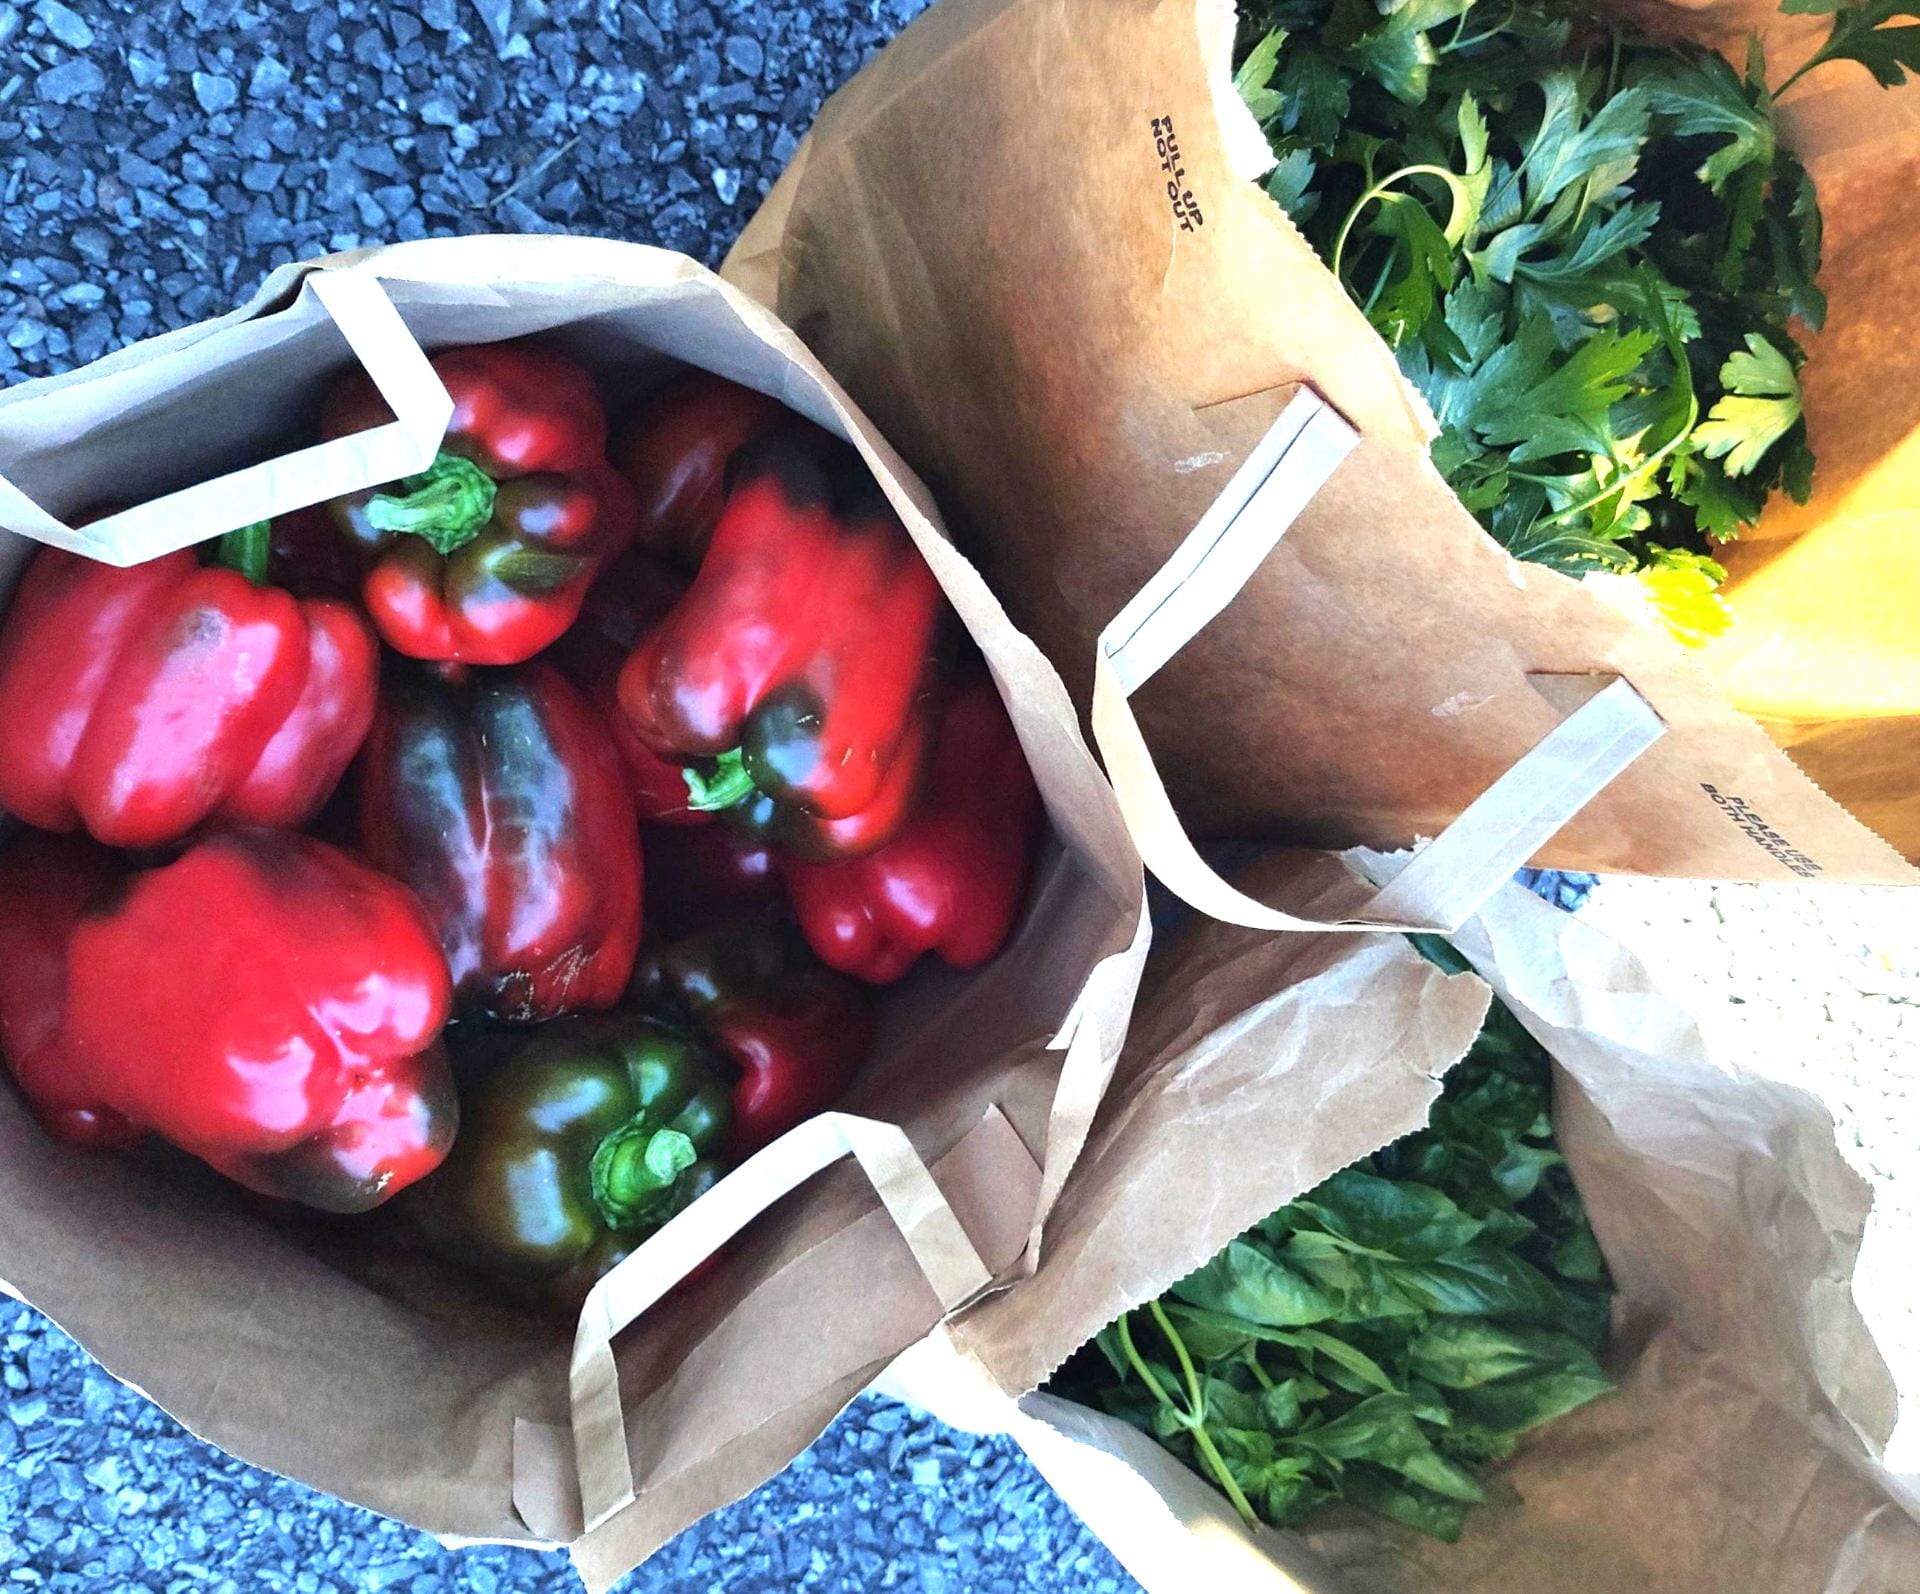 Peppers and herbs harvest by Sara for local donation